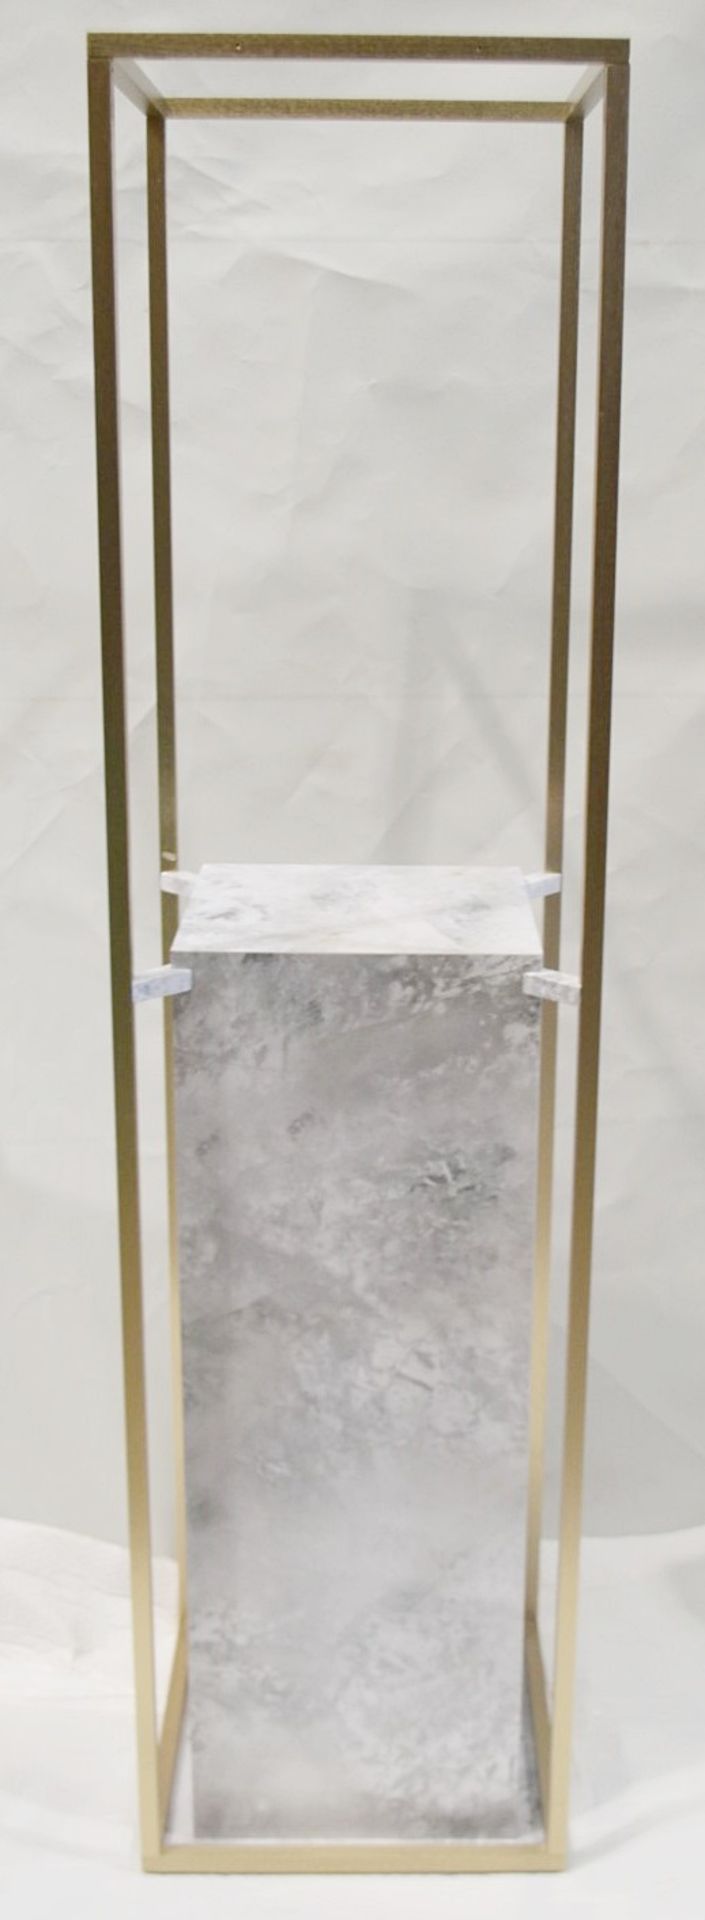 1 x 1.8 Metre Tall Freestanding Display Plinth With A Marble Effect Aestetic - Dimensions: H182 x - Image 2 of 4